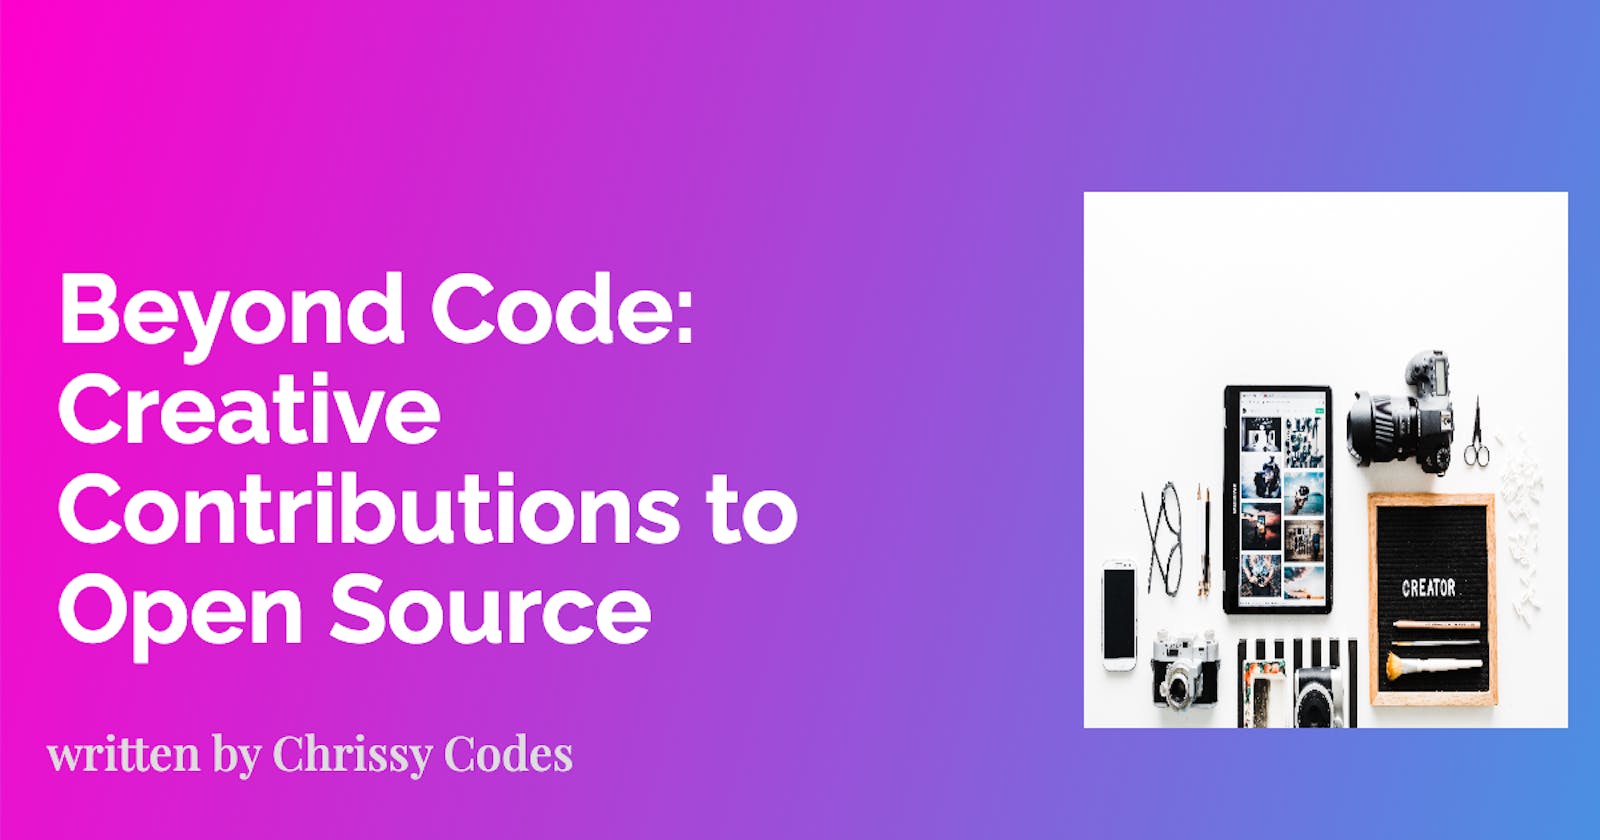 Beyond Code: Creative Contributions to Open Source